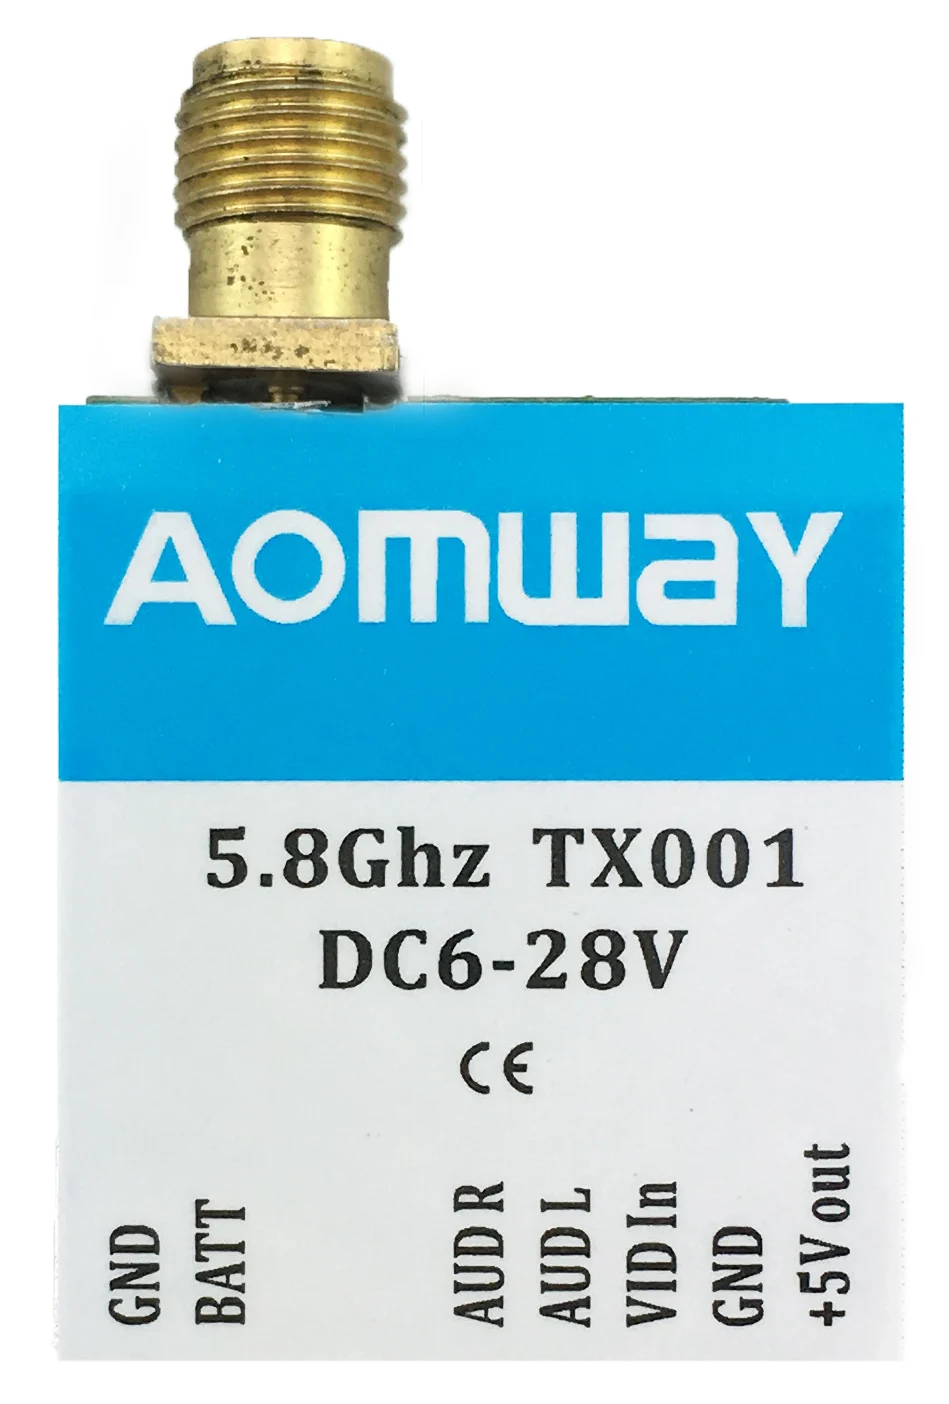 

Aomway 4 Power Adjustable Switchable 0mW 25mW 200mW 600mW 5.8G 40CH LED Indicator FPV Transmitter TX for FPV TX001